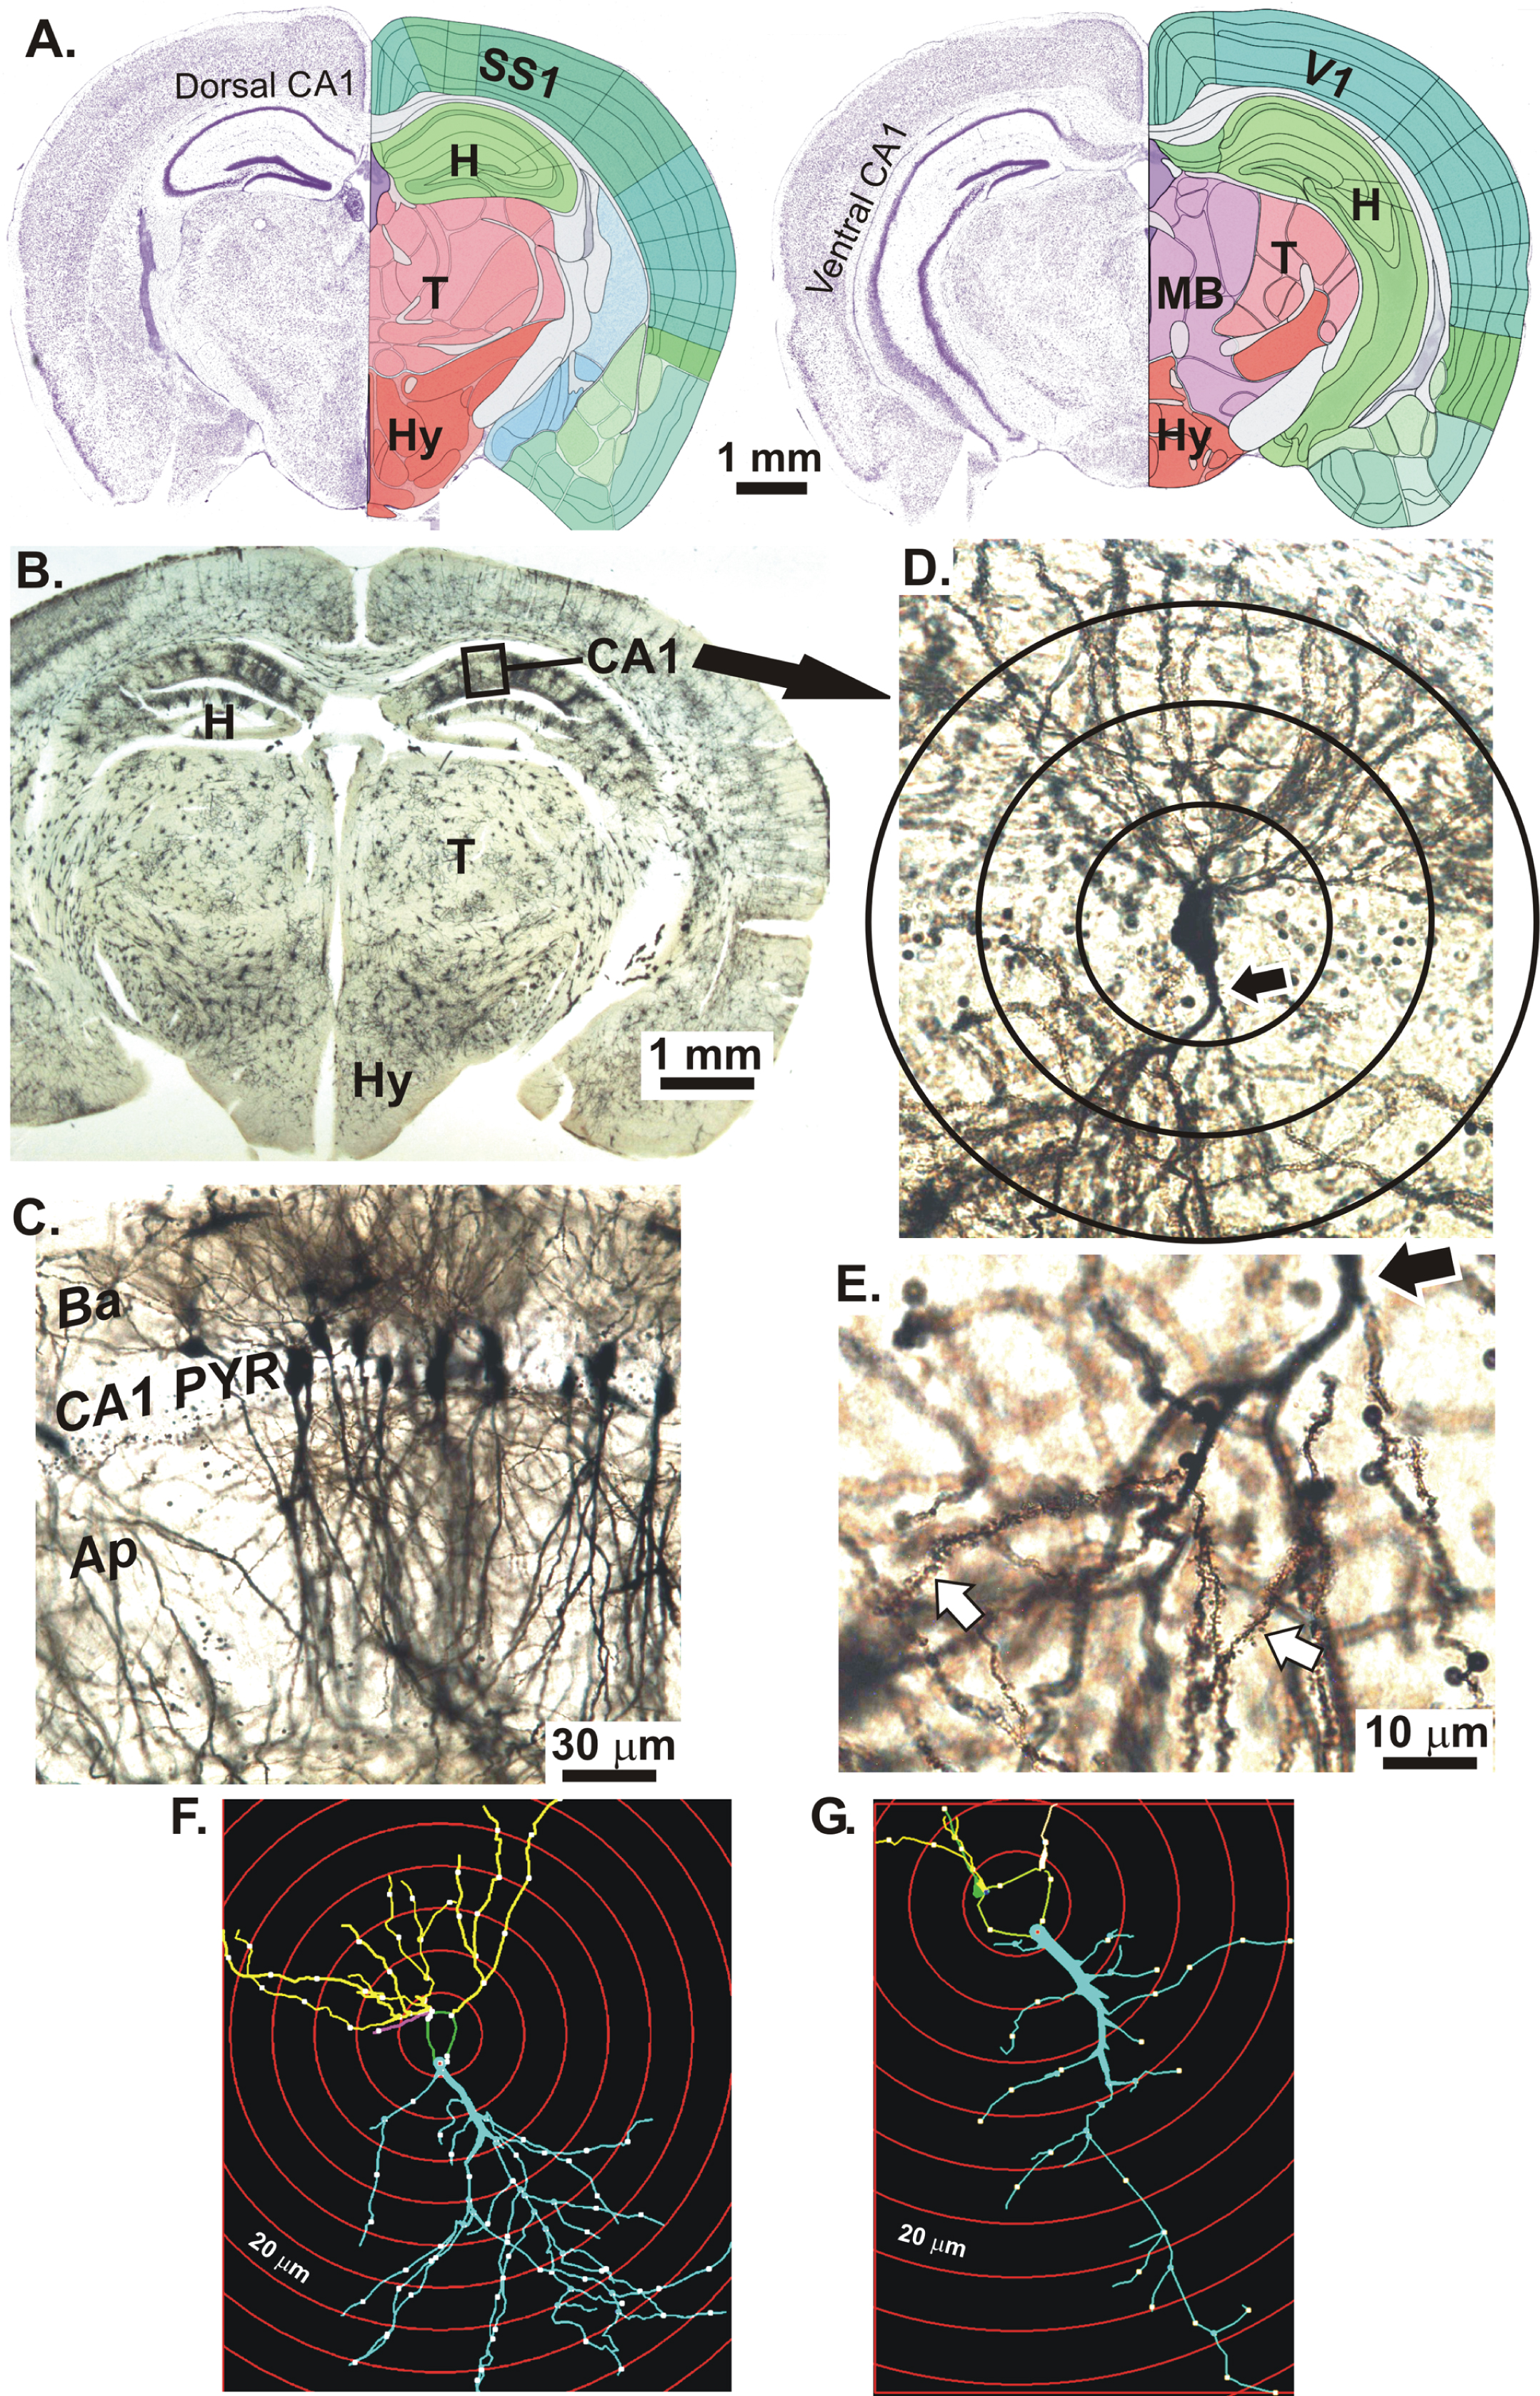 A) Coronal Nissl-stained sections of an adult mouse brain at the level of the dorsal CA1 region (left) and ventral CA1 region (right) of the hippocampus (H). The overlying neocortex is mainly primary somatosensory cortex (SS1) and more caudally, some primary visual cortex (V1). B) Golgi-Cox stained mouse coronal slice at the level of the dorsal CA1 region (box). C) CA1 stratum pyramidale with apical dendrites (Ap) in the stratum radiatum and basal dendrites (Ba) in the stratum oriens (below). D) A CA1 neuron with the proximal portion of its apical dendrite (arrow). Sholl rings are placed at 20 μm diameter intervals. E) Higher magnification of apical dendrite branches showing spines (white arrows). Hypothalamus (HY); Thalamus (T); Midbrain (MB). F) Digitized image of a dCA1 pyramidal cell tracing from a WT mouse showing dendrites (lines), nodes (dots), and Sholl rings (red circles). G) dCA1 pyramidal cell tracing from a KO mouse showing an obviously reduced dendritic arbor compared to the WT neuron in F. Images in A adapted from brainatlas.org.